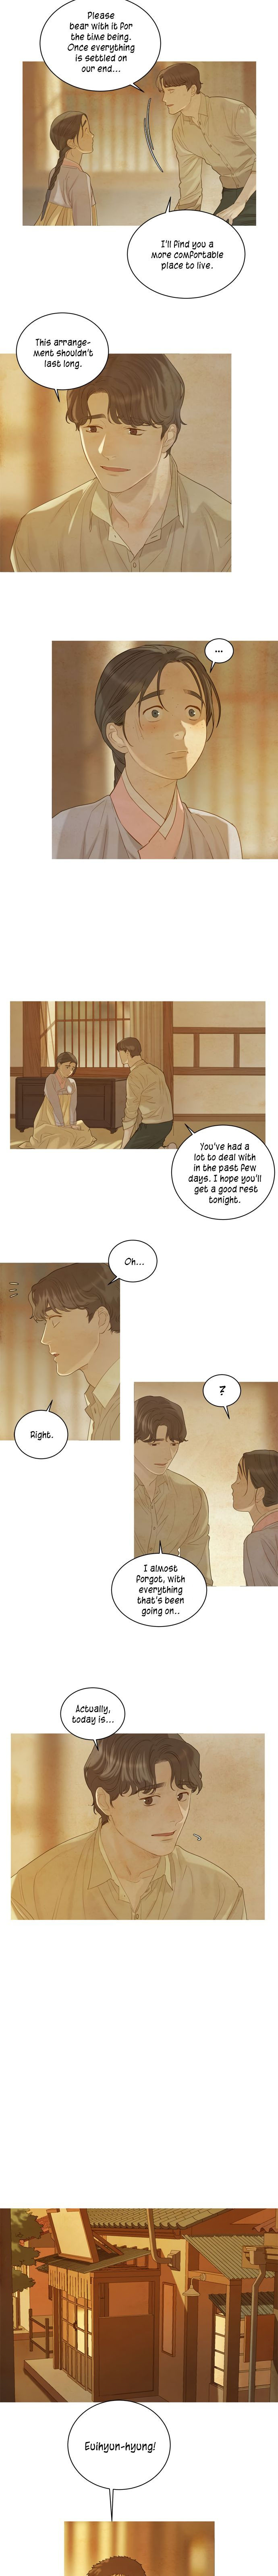 Gorae Byul - The Gyeongseong Mermaid - Chapter 27 Page 4